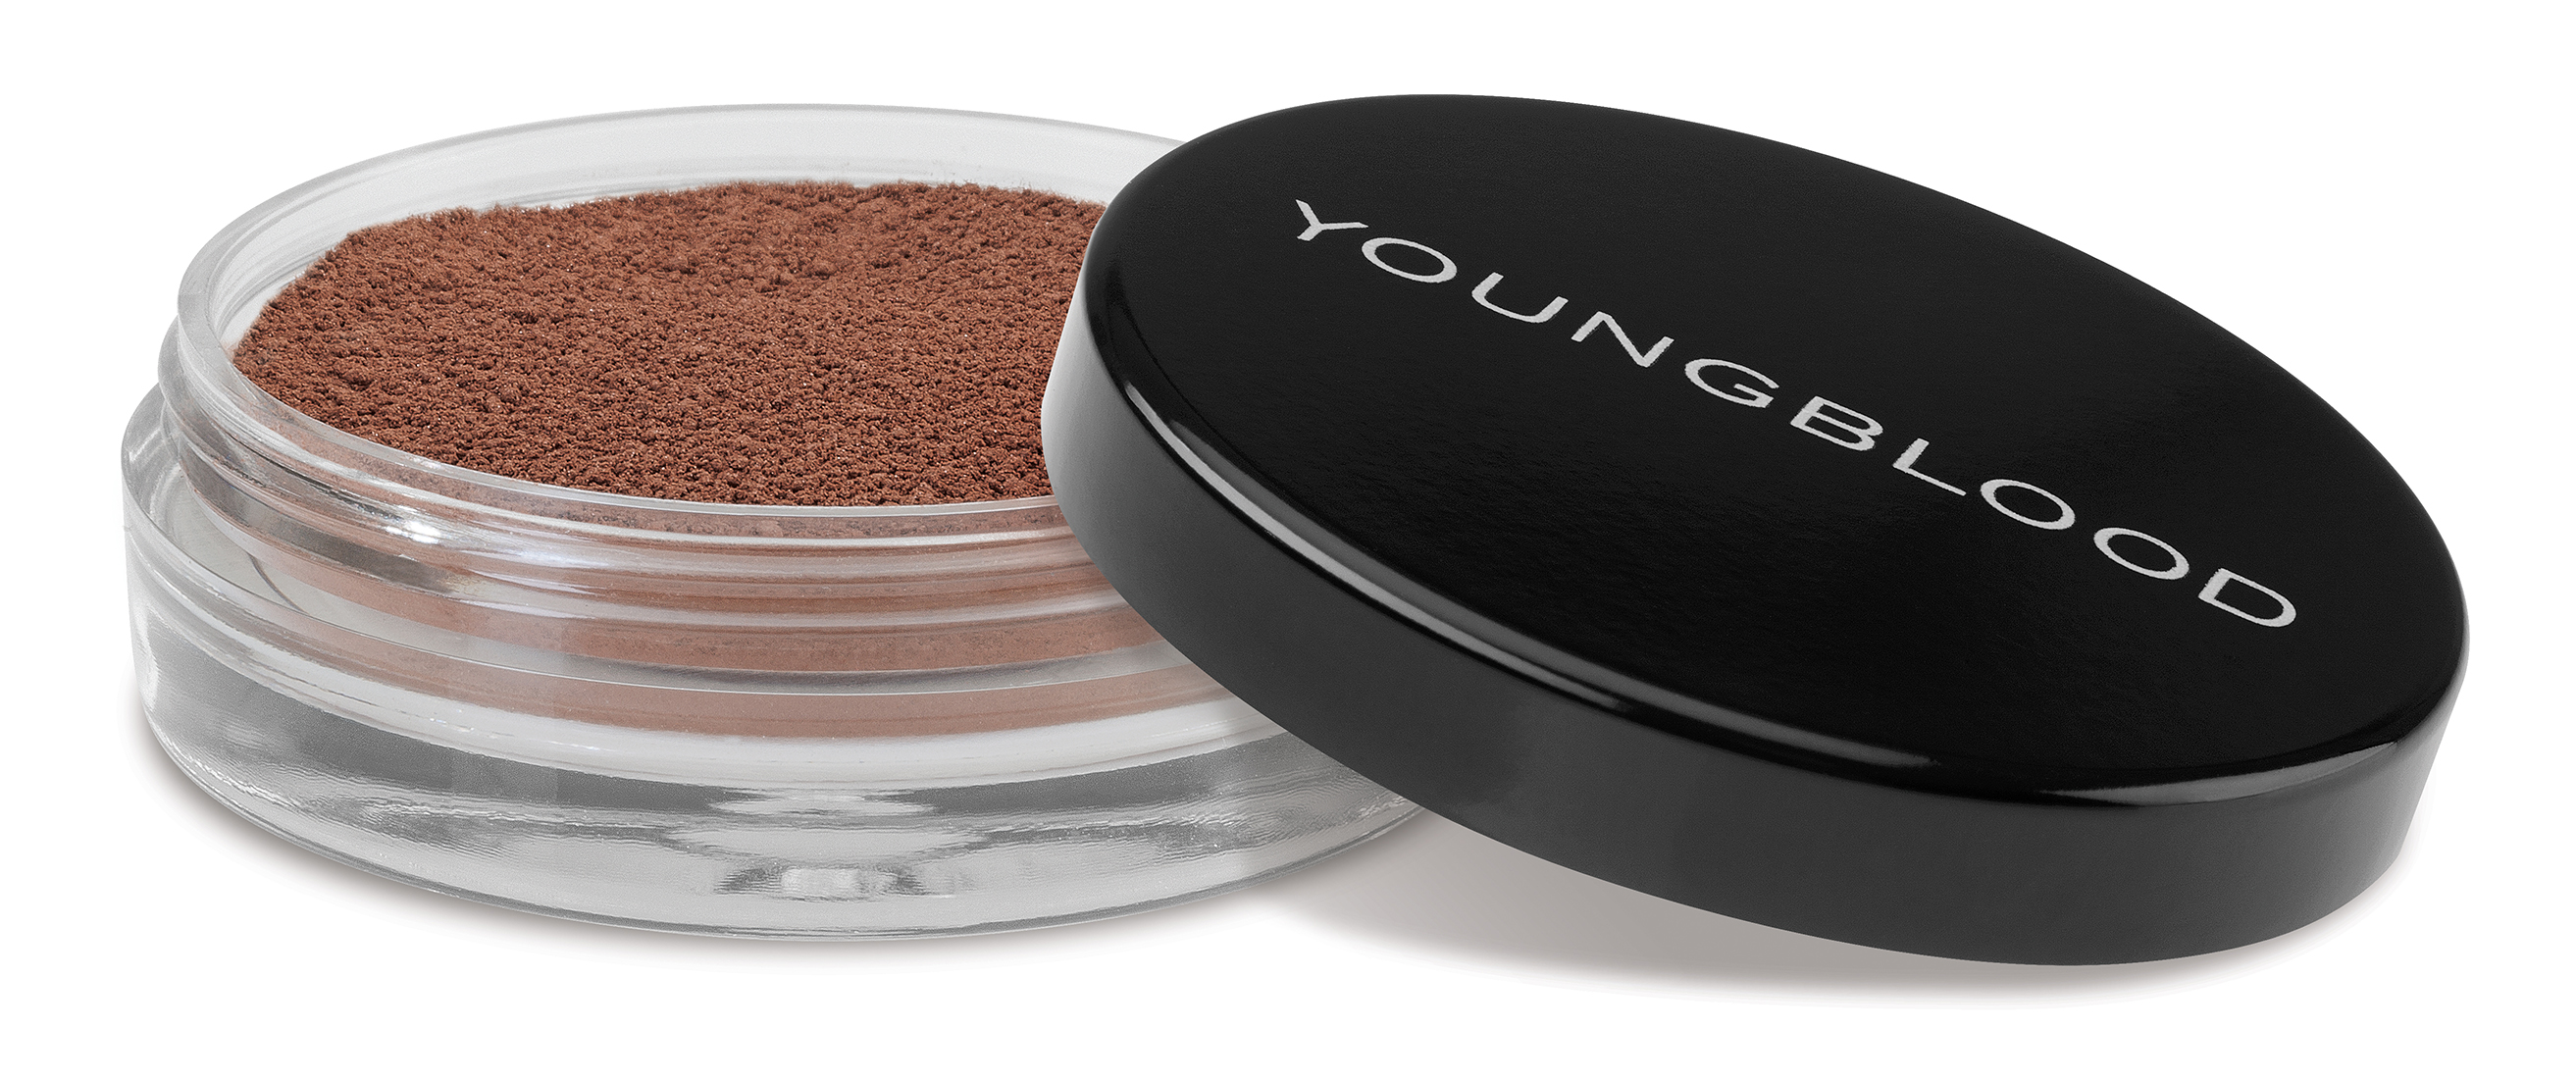 Youngblood Crushed Mineral Blush 05 Adobe